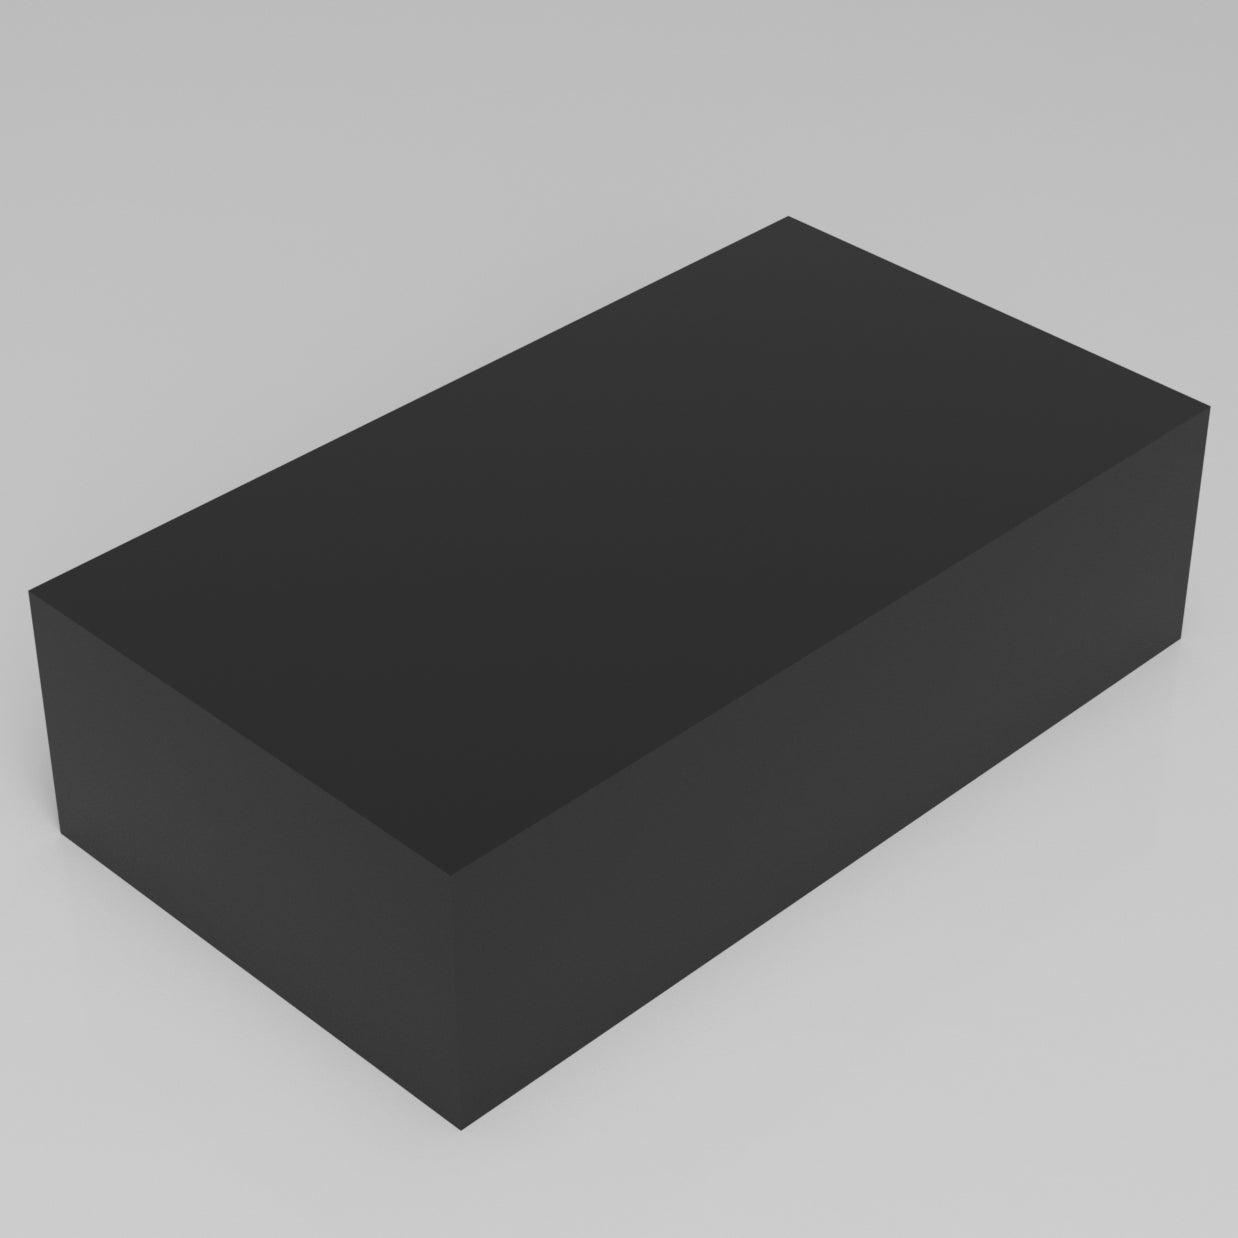 Machinable Wax Rectangular Block Front View 5 Inch by 10 Inch by 18 Inch